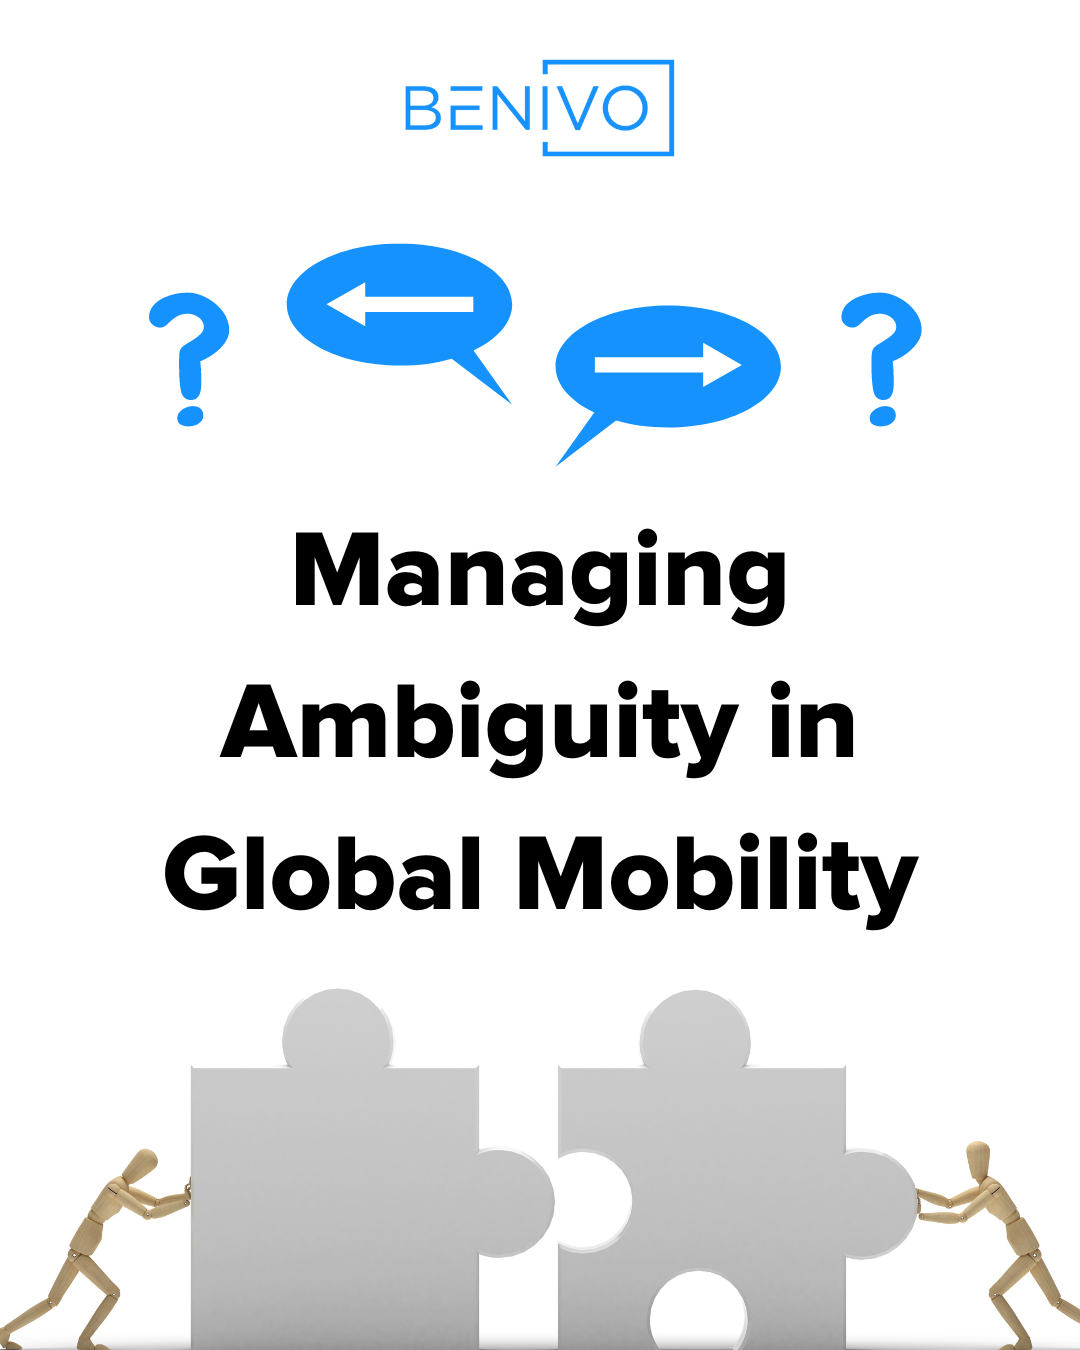 Managing Ambiguity in Global Mobility